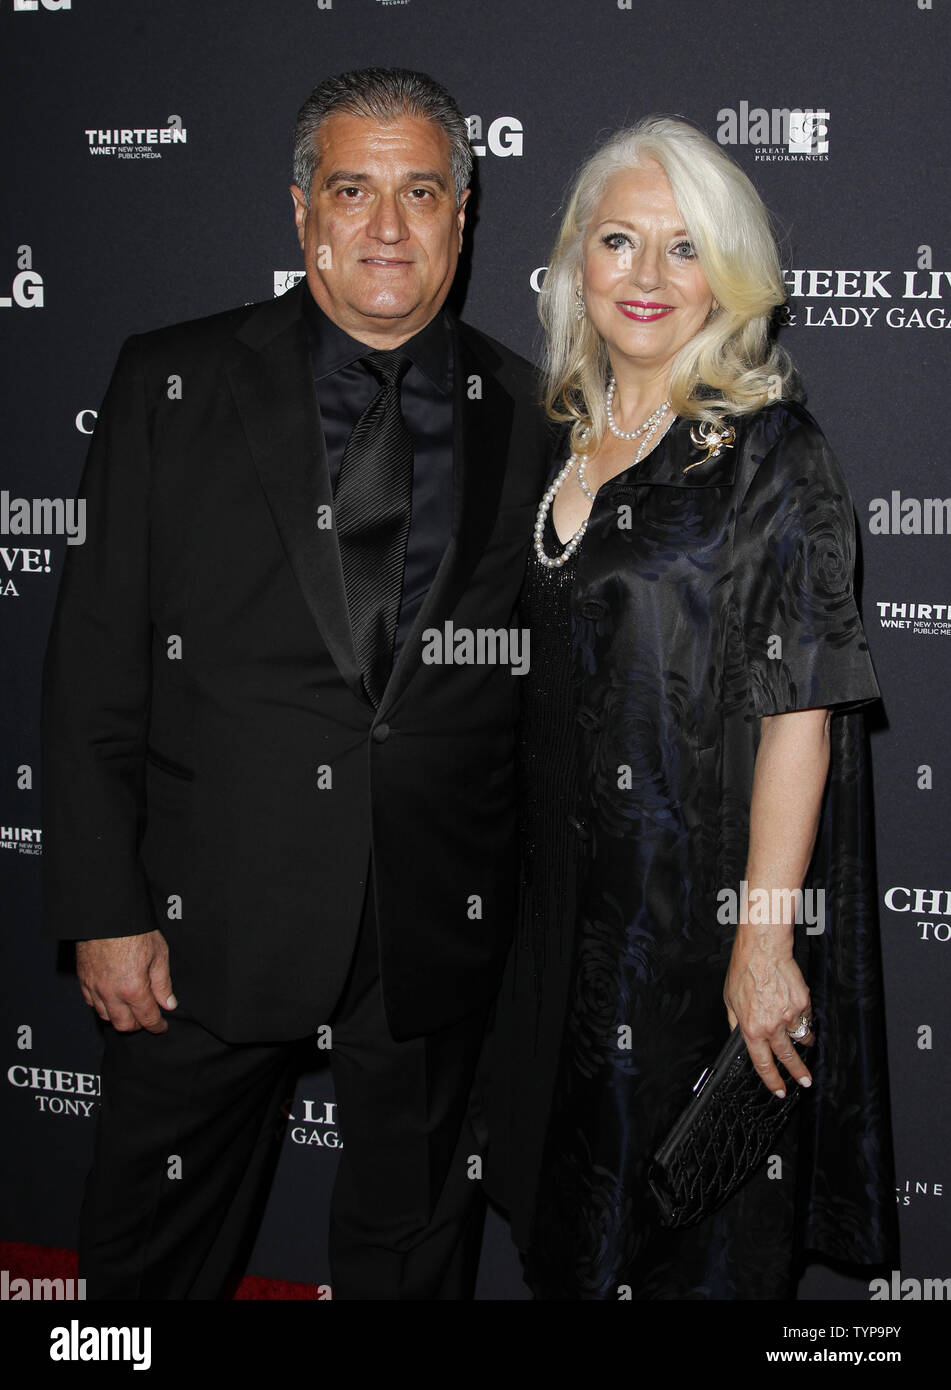 Joe Germanotta and Cynthia Germanotta arrive on the red carpet before the taping of an upcoming television concert special 'Cheek To Cheek' at Jazz at Lincoln Center at the Time Warner Center in New York City on July 28, 2014. Lady Gaga and Tony Bennett are collaborating on a jazz record that will be released later this fall.      UPI/John Angelillo Stock Photo